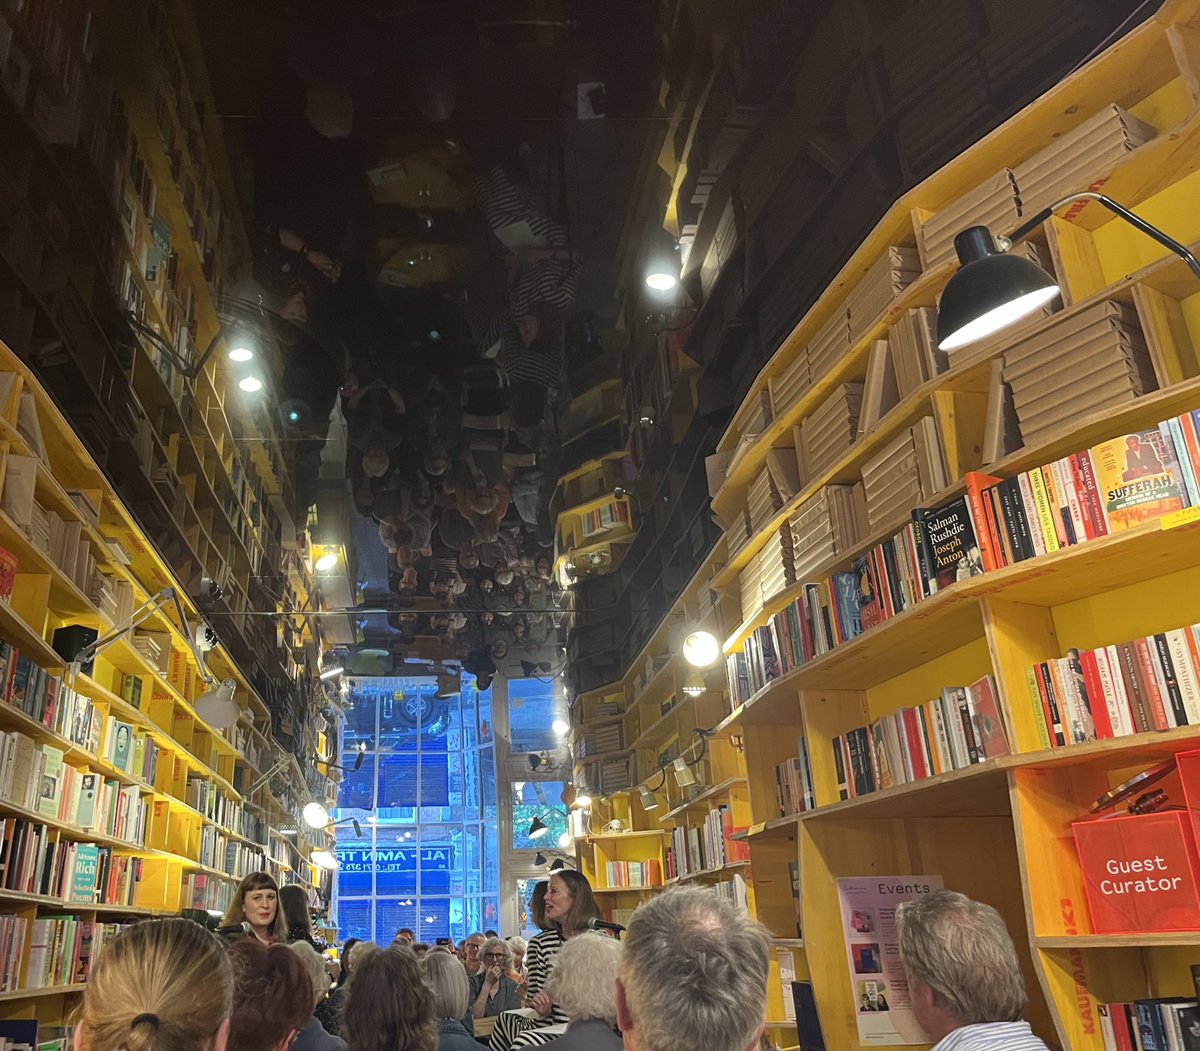 Masterclass tier chat between faves @JanCarson7280 & @beingvarious this evening at stunning Libreria London about Jan’s new book, Quickly, While They Still Have Horses. Just absolutely wonderful, I could have listened for hours